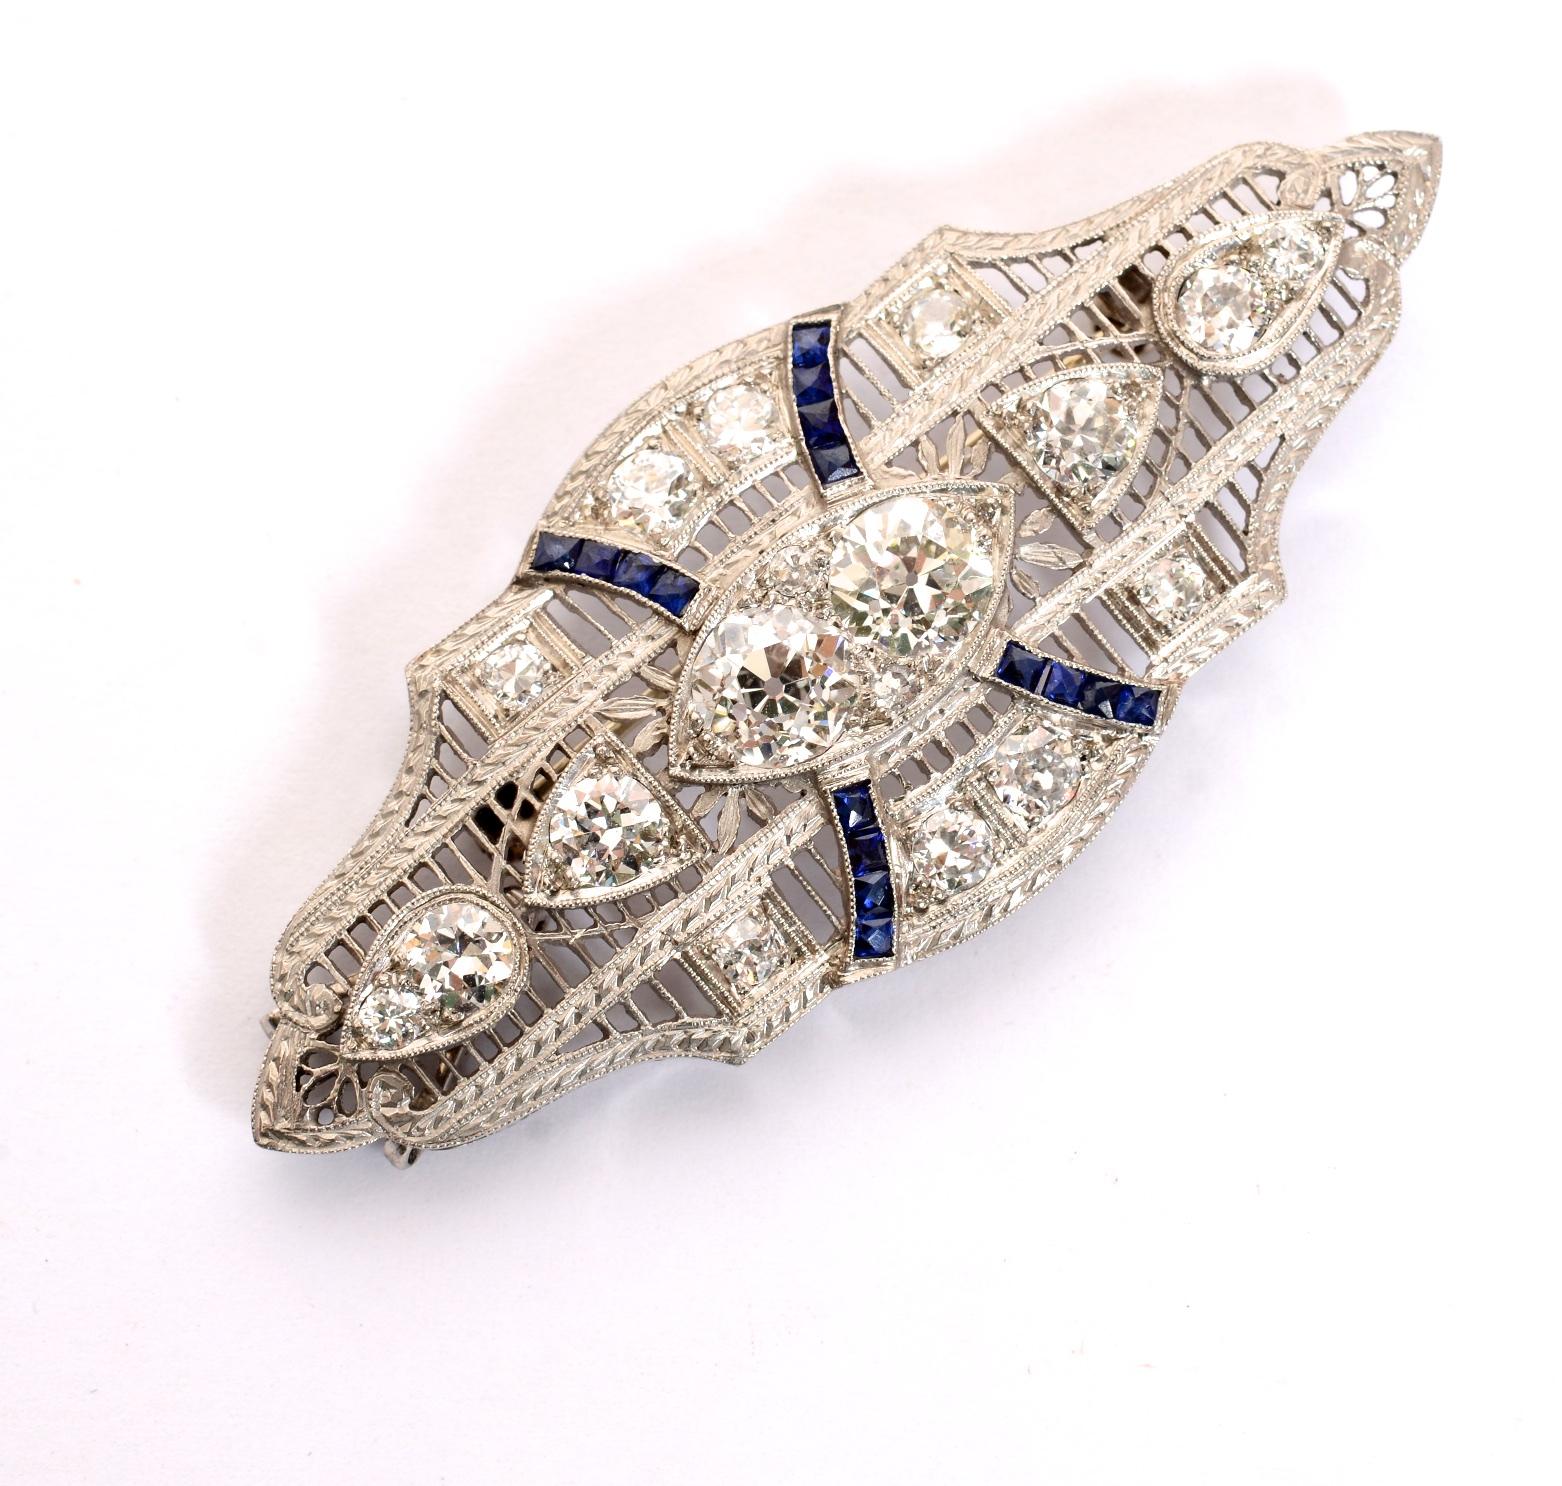 Art Deco 3.75 Carat Diamond and Sapphire, Brooch/Pendant, in a Platinum Filigree Setting. The brooch has 16 diamonds, total weight approximately 3.75 carats and 16 square French cut sapphires weighing approximately .32 carats. The brooch has a